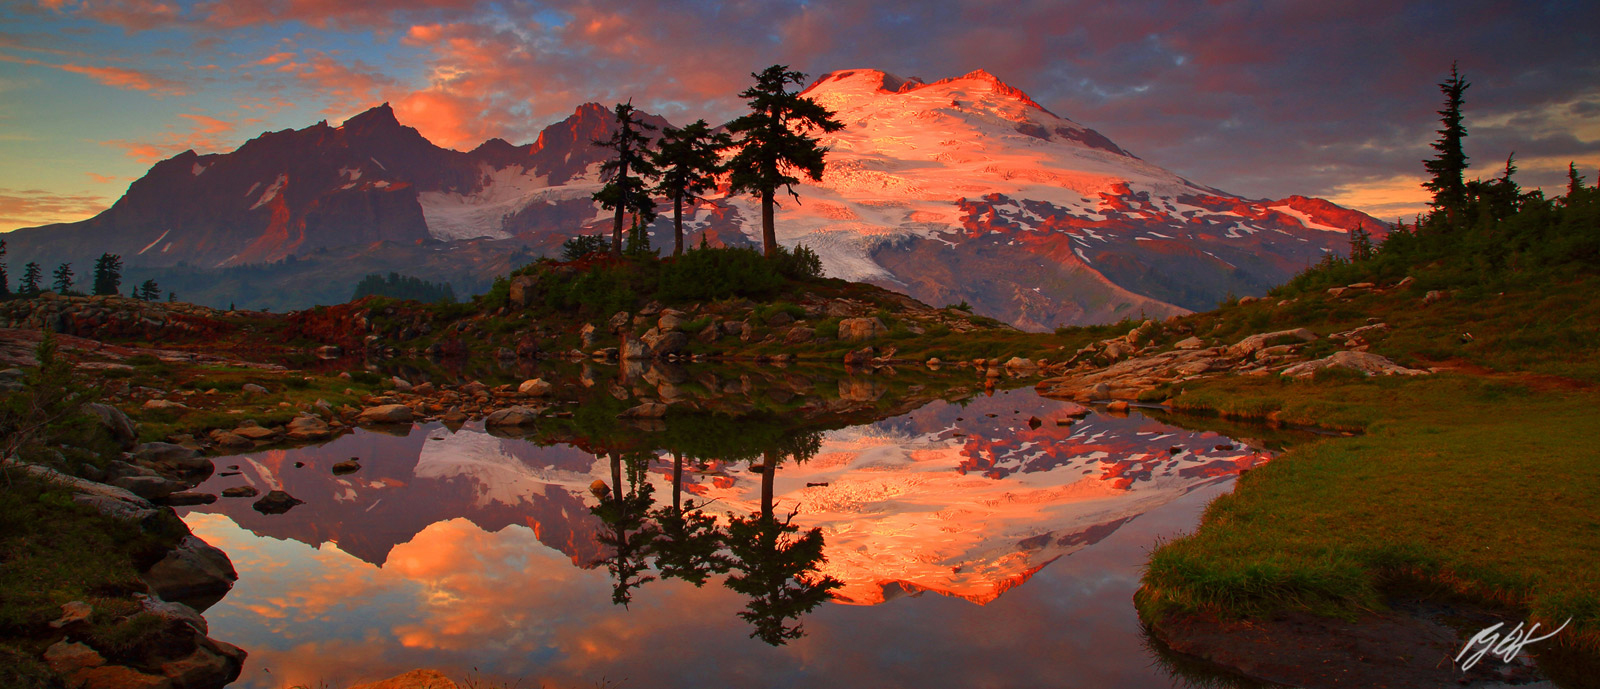 Sunset Mt Baker Reflected in a Tarn from Park Butt in the Mt Baker National Recreation Area in Washington